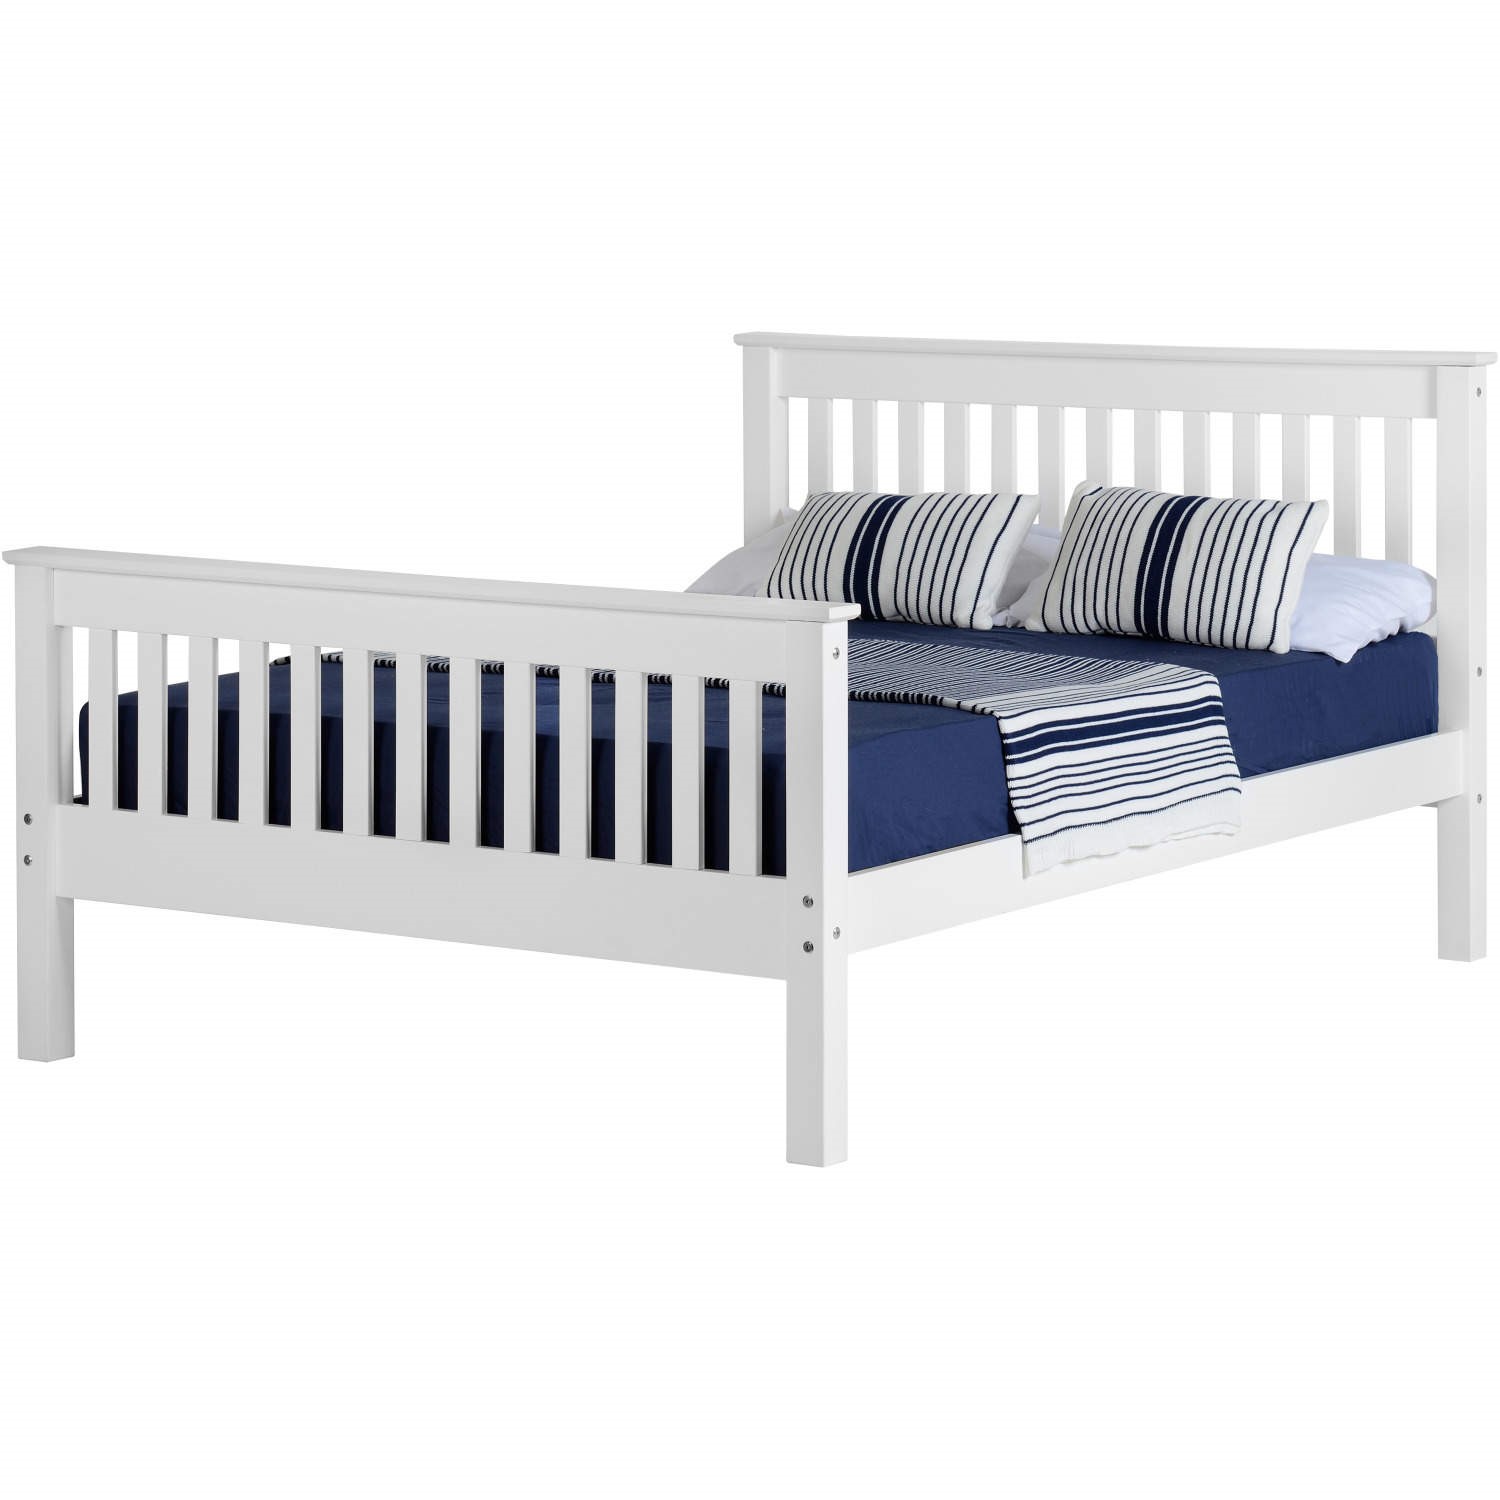 Seconique Monaco King Size Bed Frame In, White Shaker Double Bed Frame